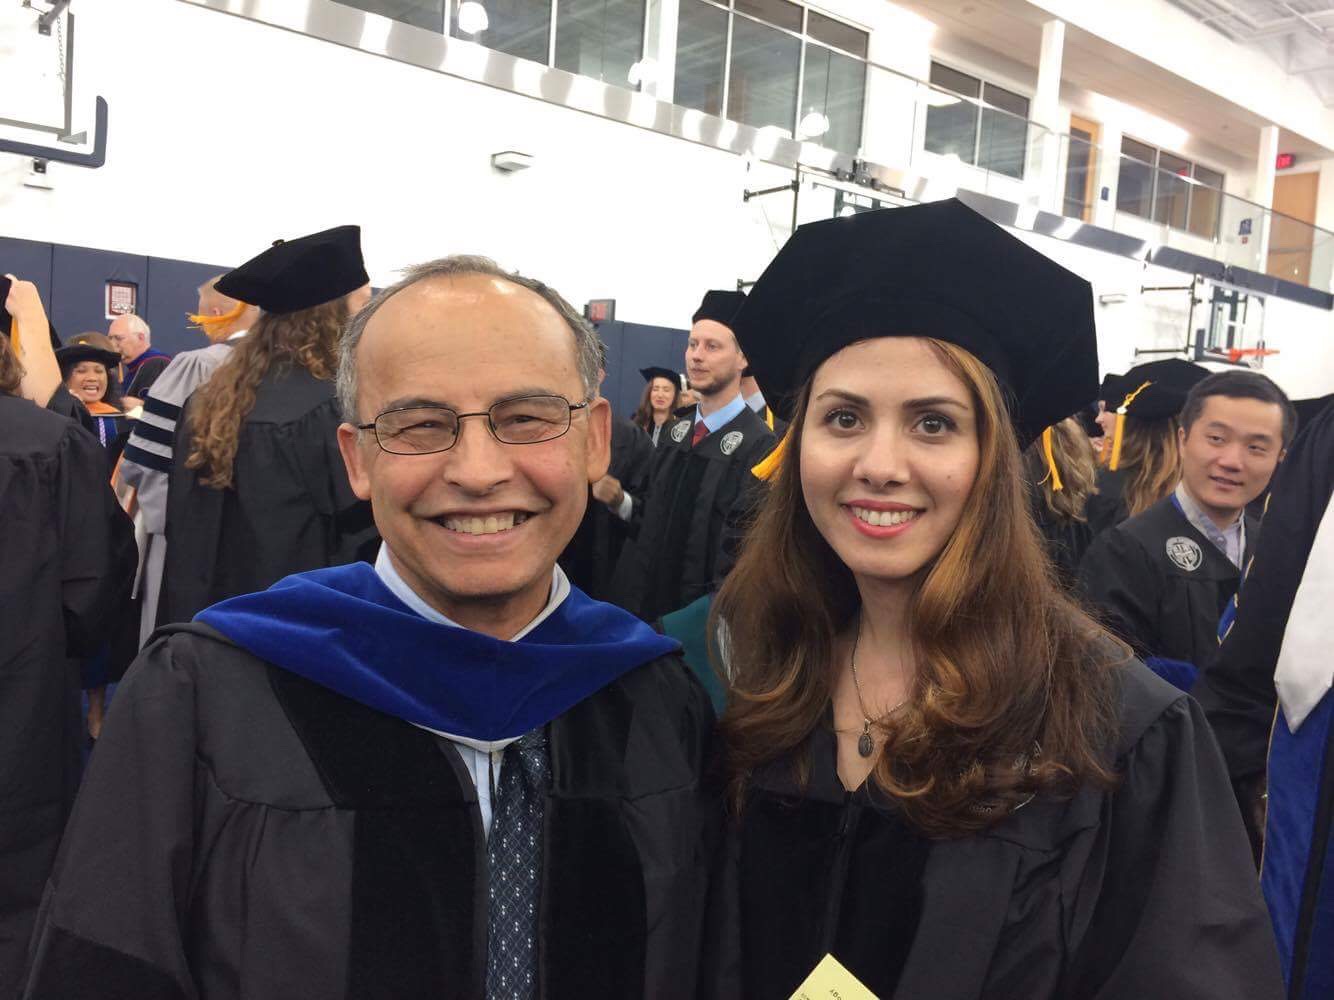 Soheila Mohades and Dr. Laroussi during the May 2017 graduation ceremony